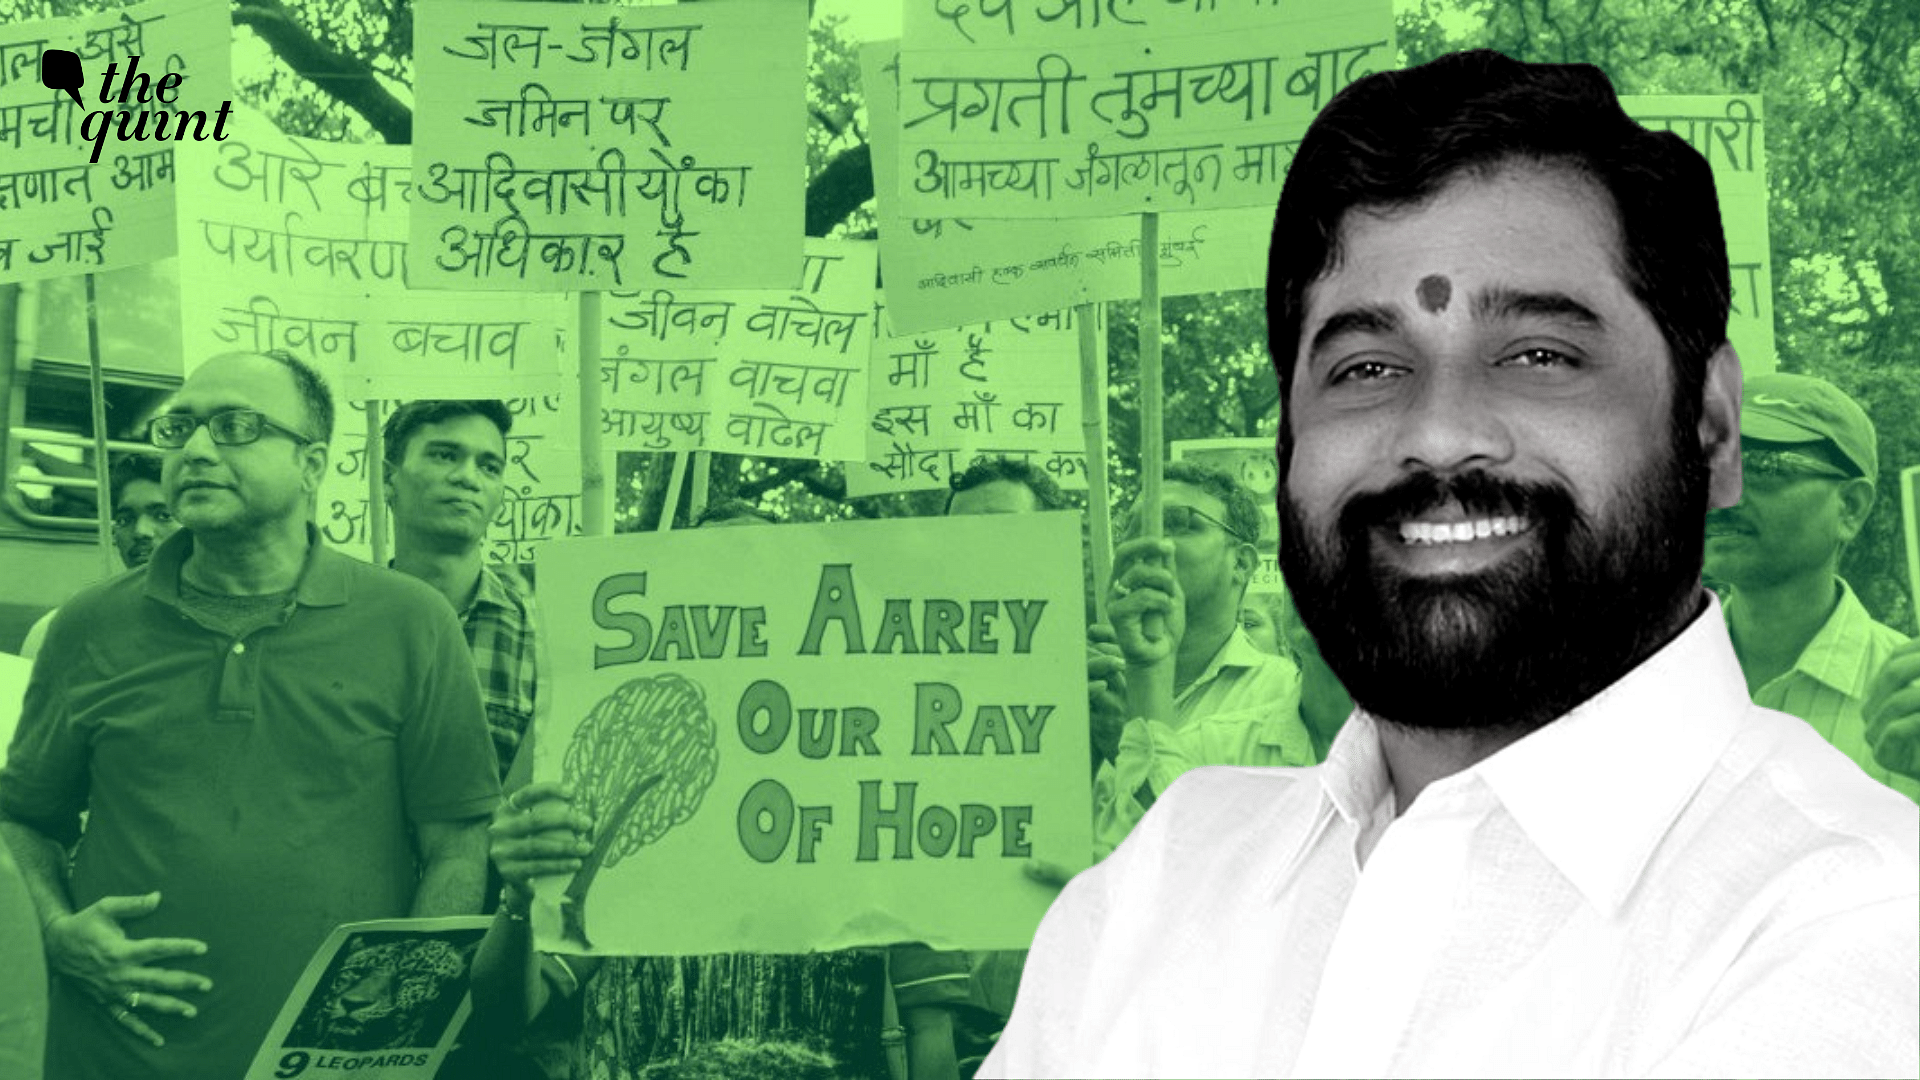 <div class="paragraphs"><p>The Maharashtra government, led by Chief Minister <a href="https://www.thequint.com/news/politics/eknath-shinde-profile-next-chief-minister-of-maharashtra-shiv-sena-leader-who-is-he">Eknath Shinde</a>, has also tasked the Mumbai Metro Rail Corporation (MMRC) to mobilise contractors and resume work at the site.</p></div>